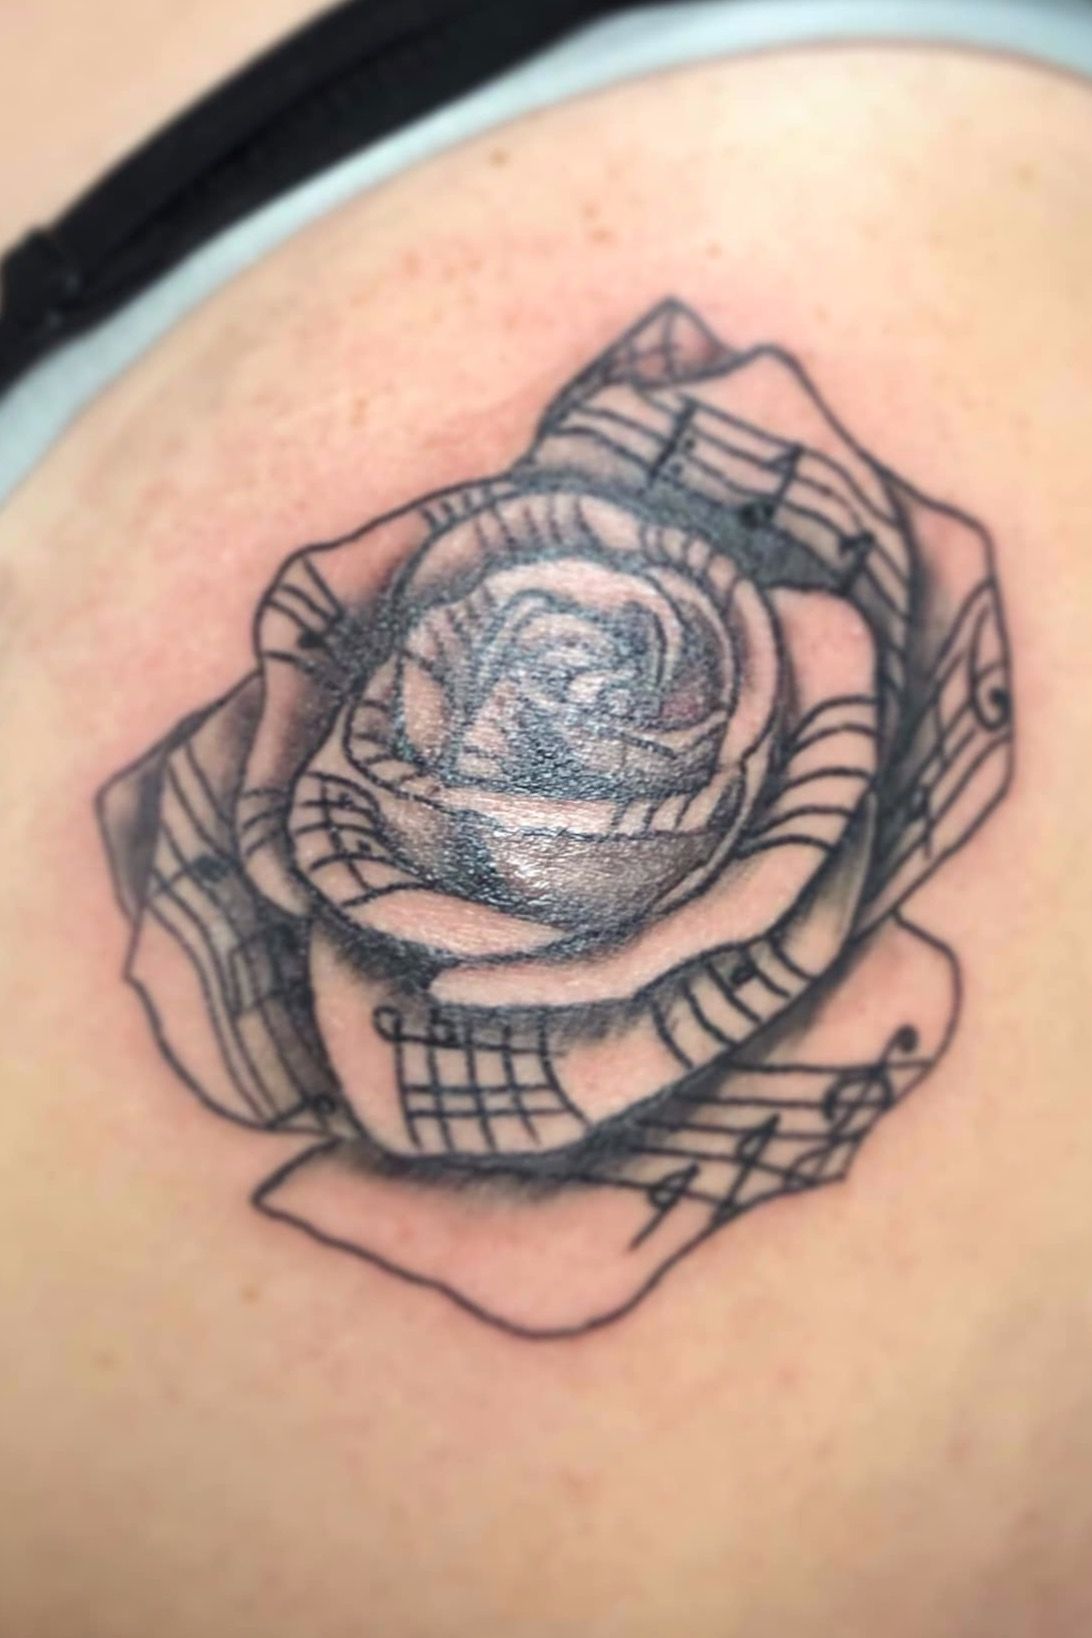 Peony and treble clef tattoo done in fine line located